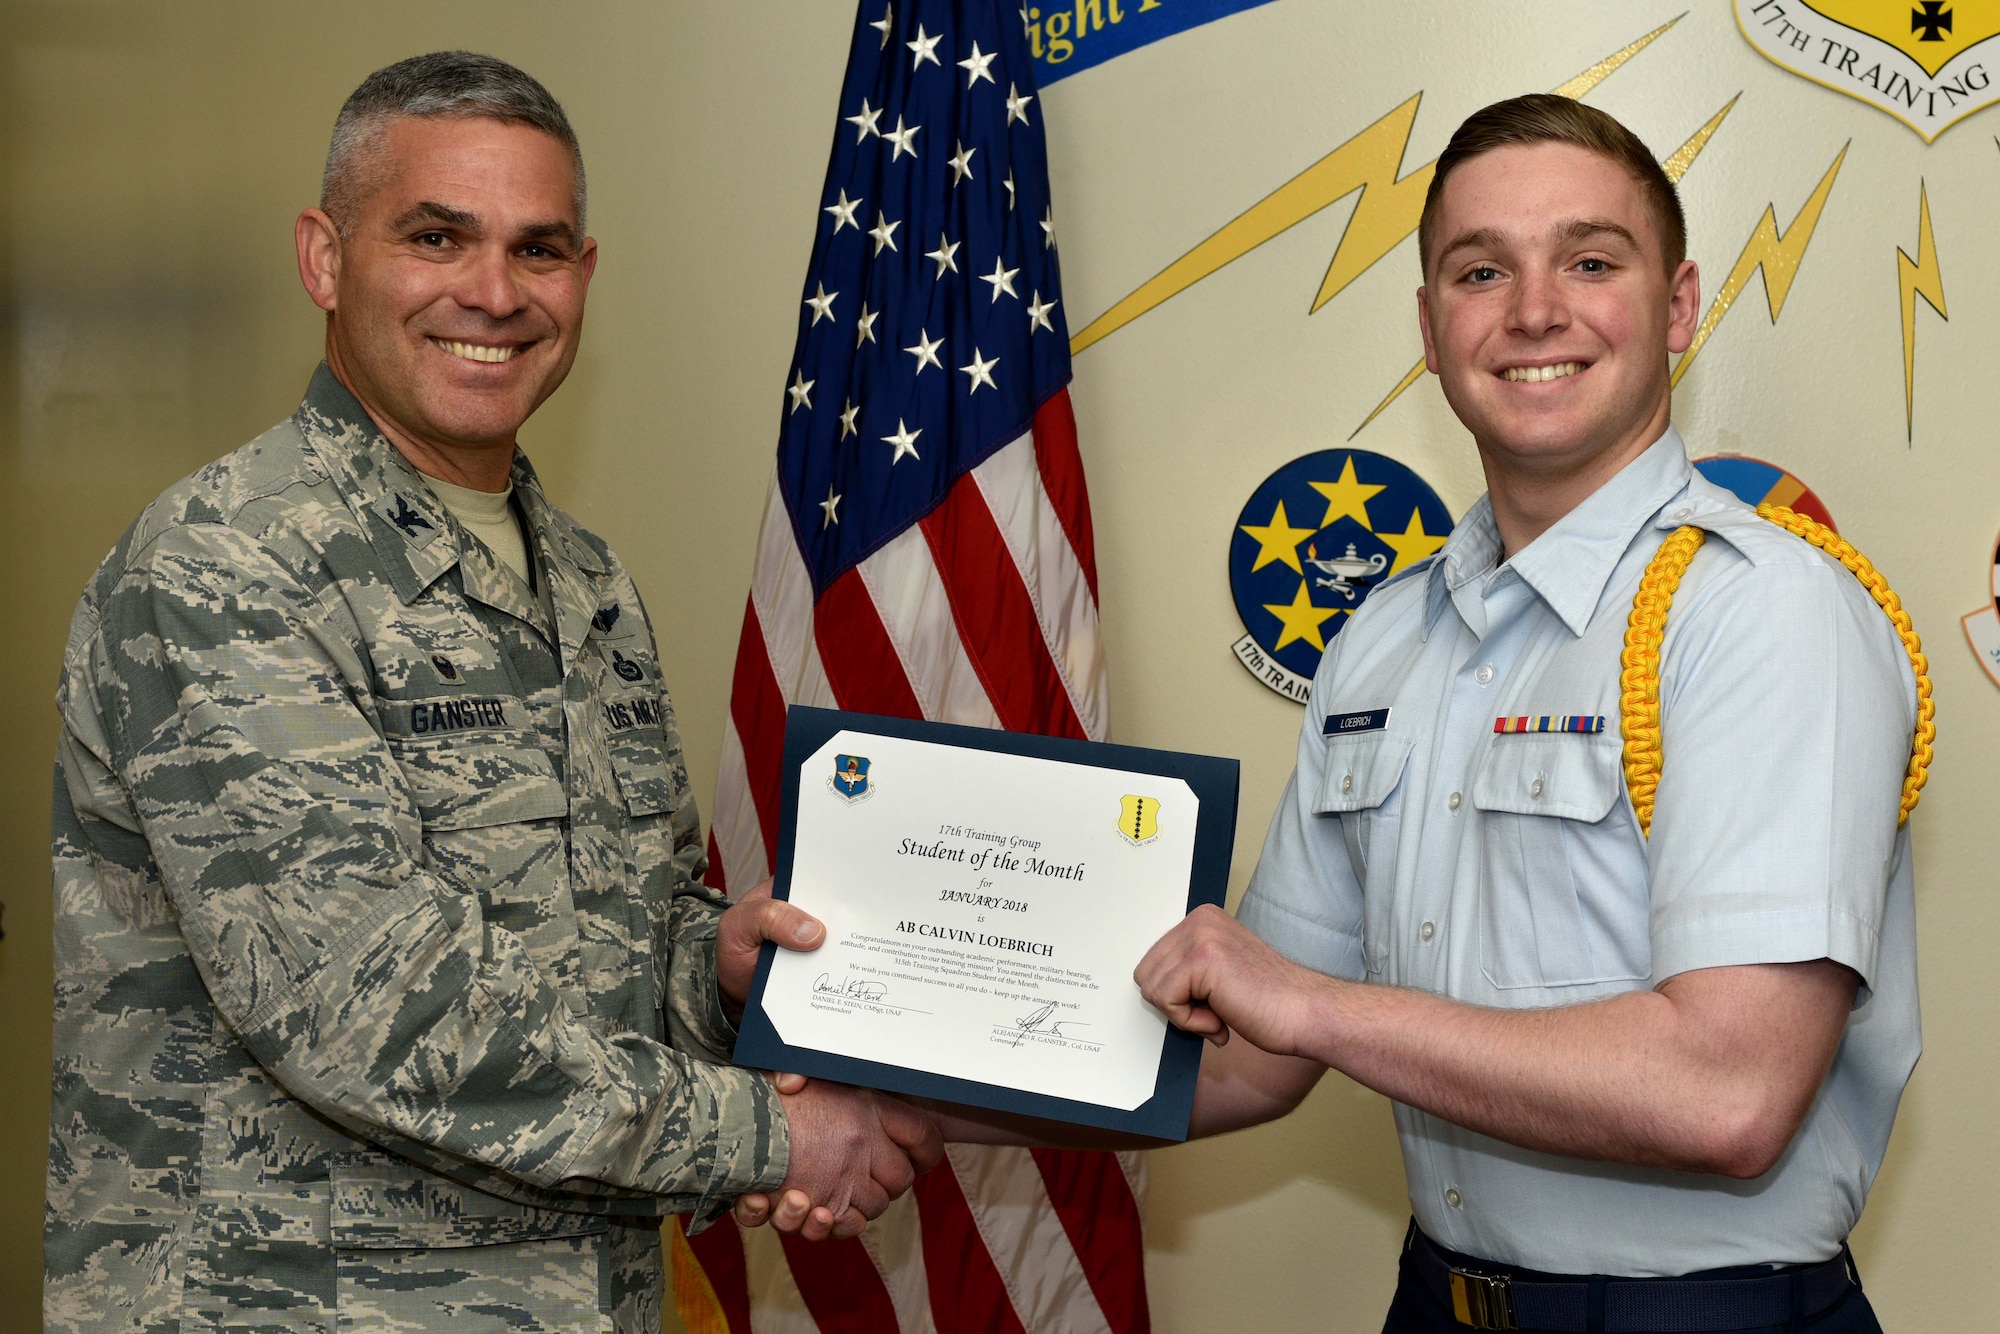 U.S. Air Force Col. Alex Ganster, 17th Training Group commander, presents the 315th Training Squadron Student of the Month award for Jan. 2018 to Airman Calvin Loebrich, 315th TRS trainee, in the Brandenburg Hall on Goodfellow Air Force Base, Texas, Jan. 2, 2018. The mission of the 17th Training Group is to Train, Develop and Inspire Professional Fire Protection and Intelligence, Surveillance and Reconnaissance Warriors.